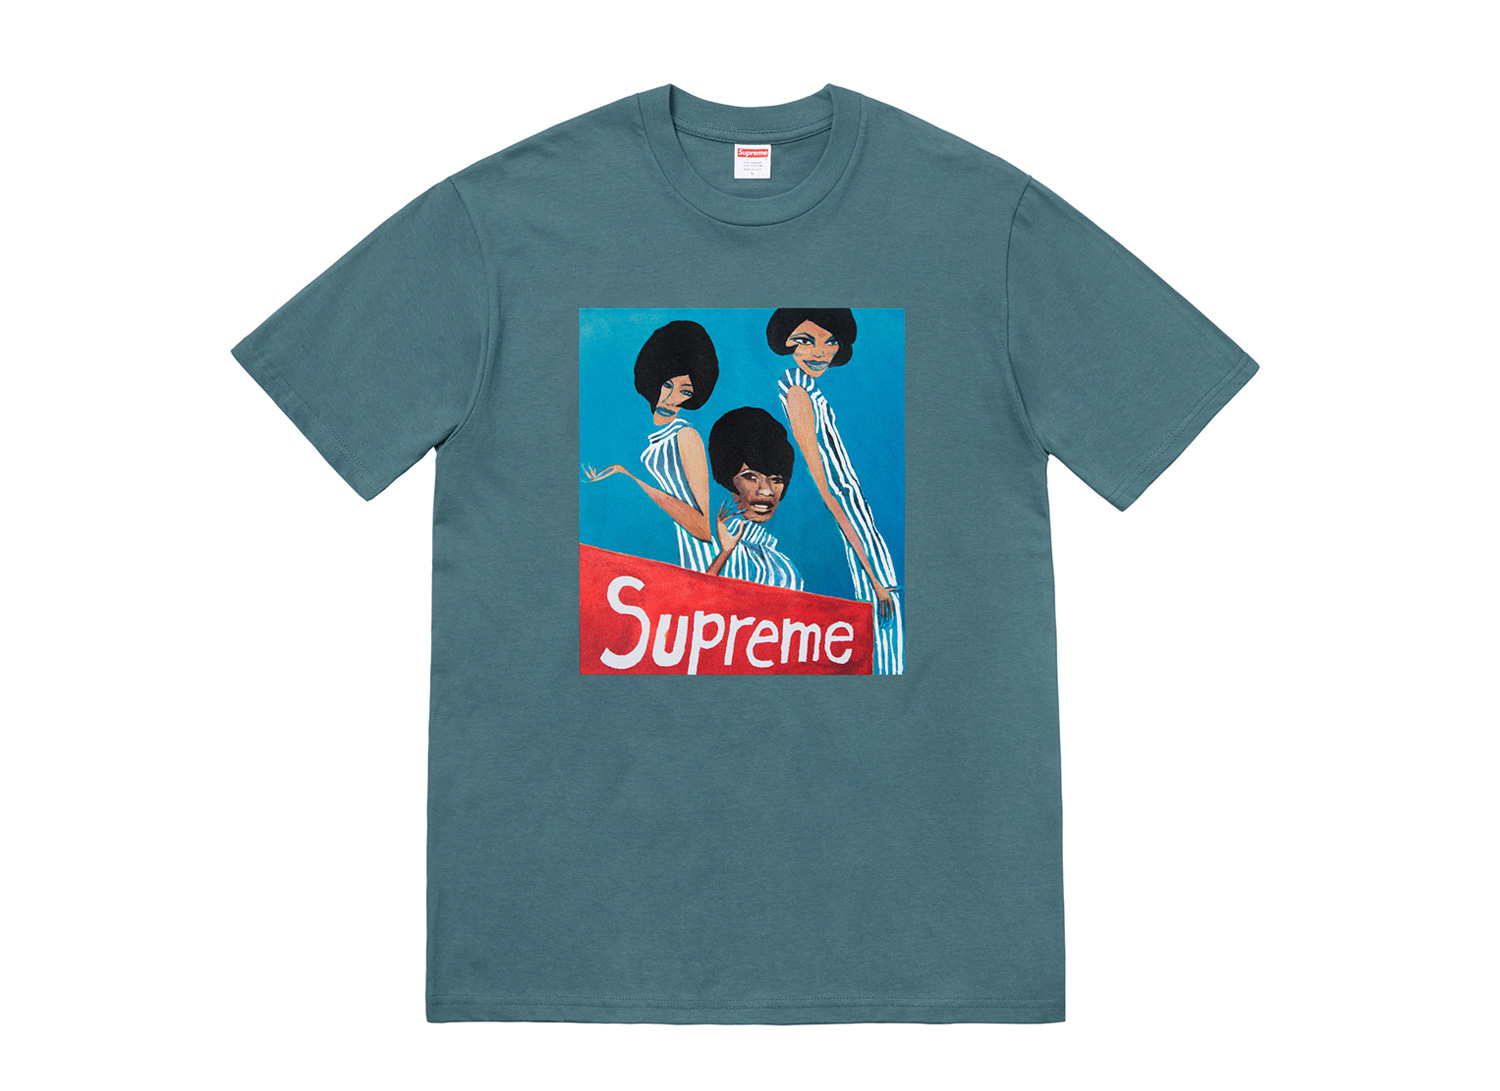 Tabboo! for Supreme "Group Tee"